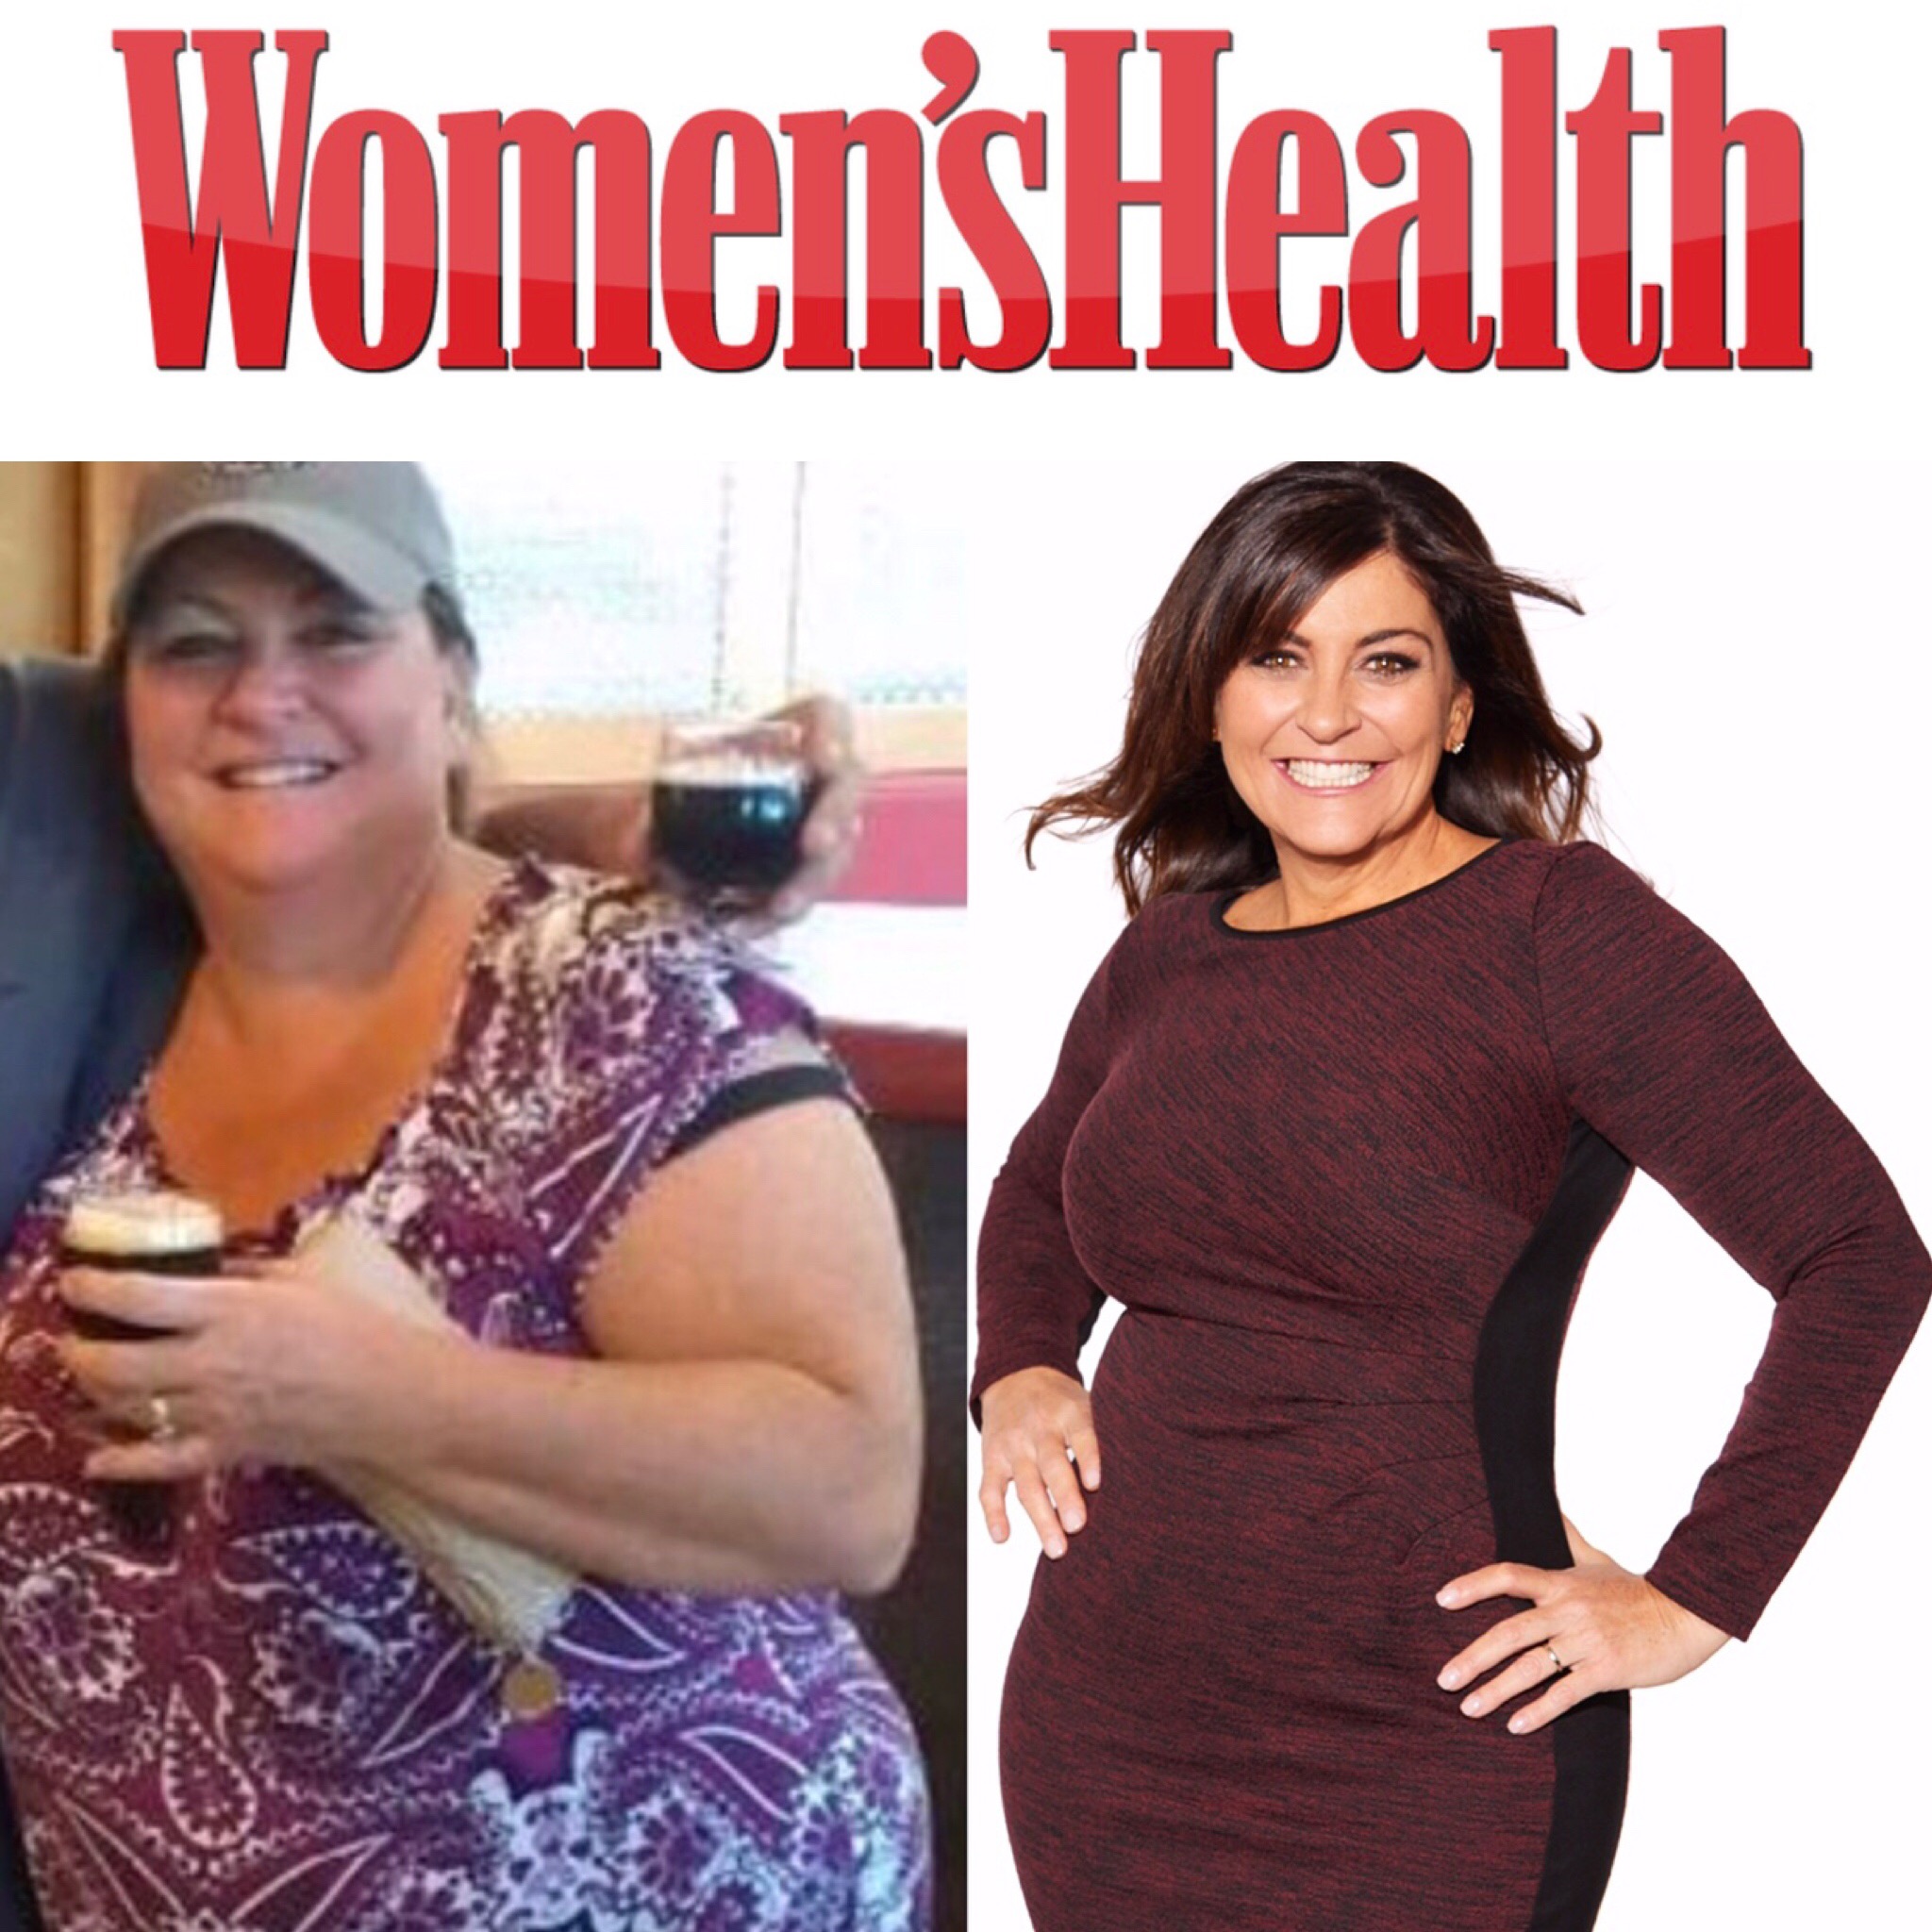 ‘How I Finally Lost 140 Pounds After Years Of Dieting’ Jenna Leveille had tried every plan out there. BY DANIELLE PAGE